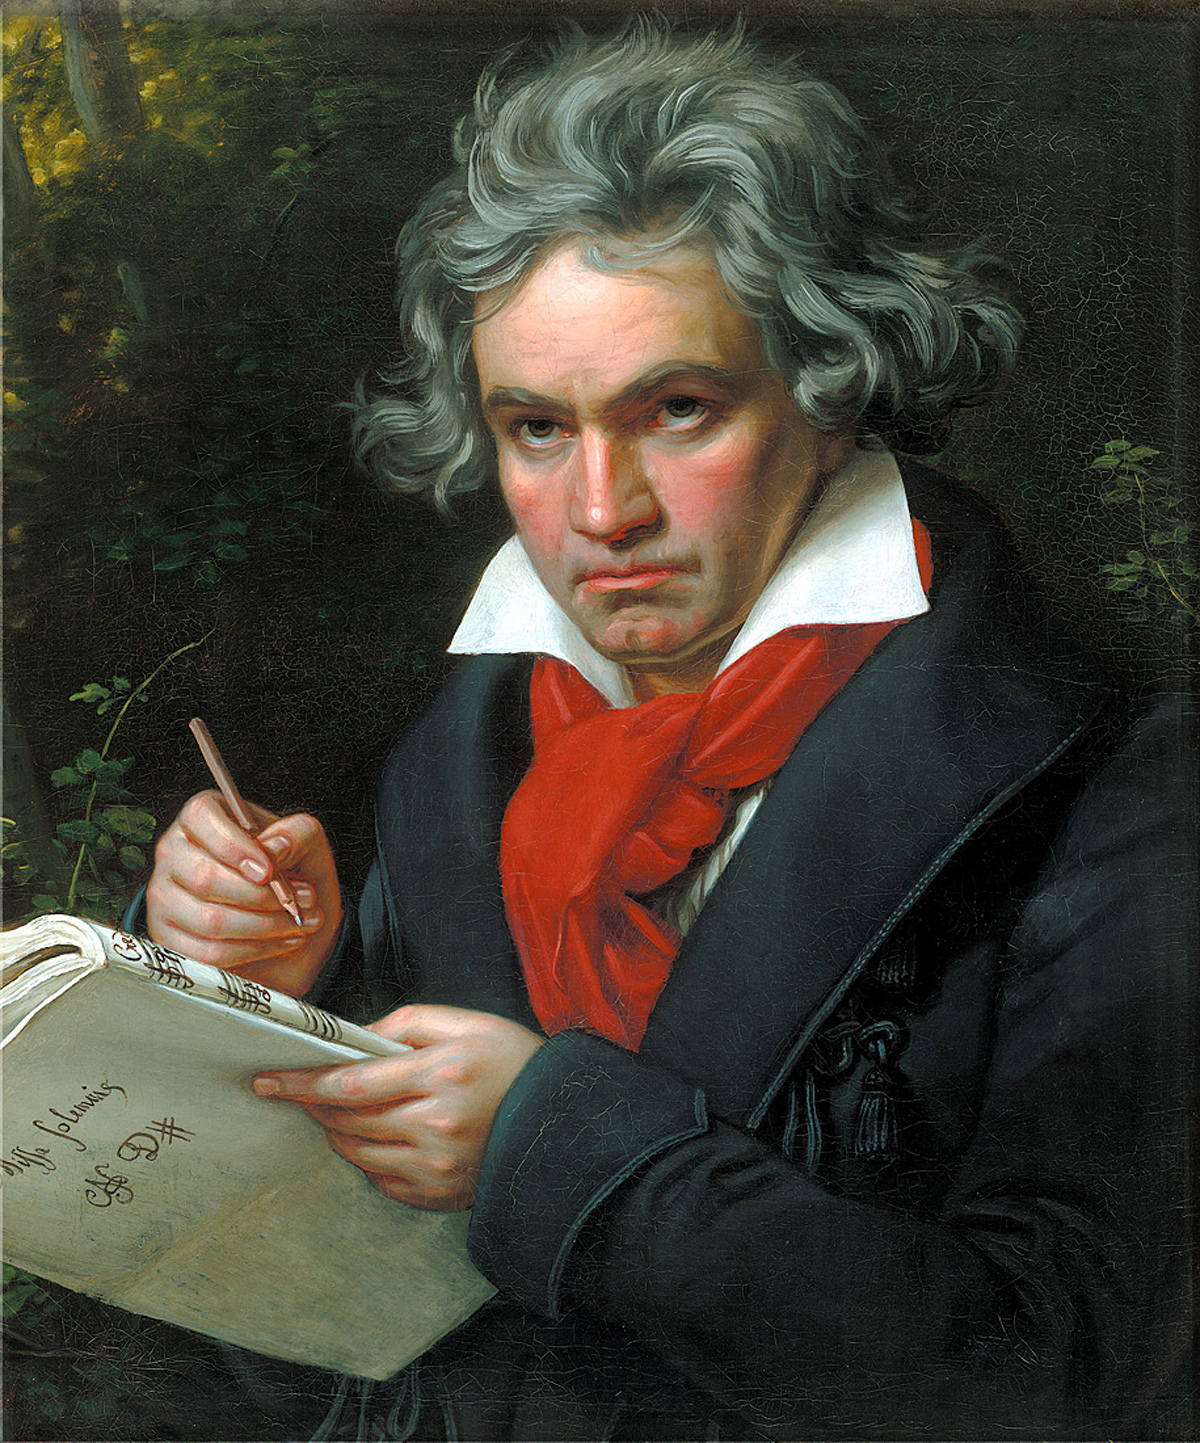 Beethoven with pen and paper in hand